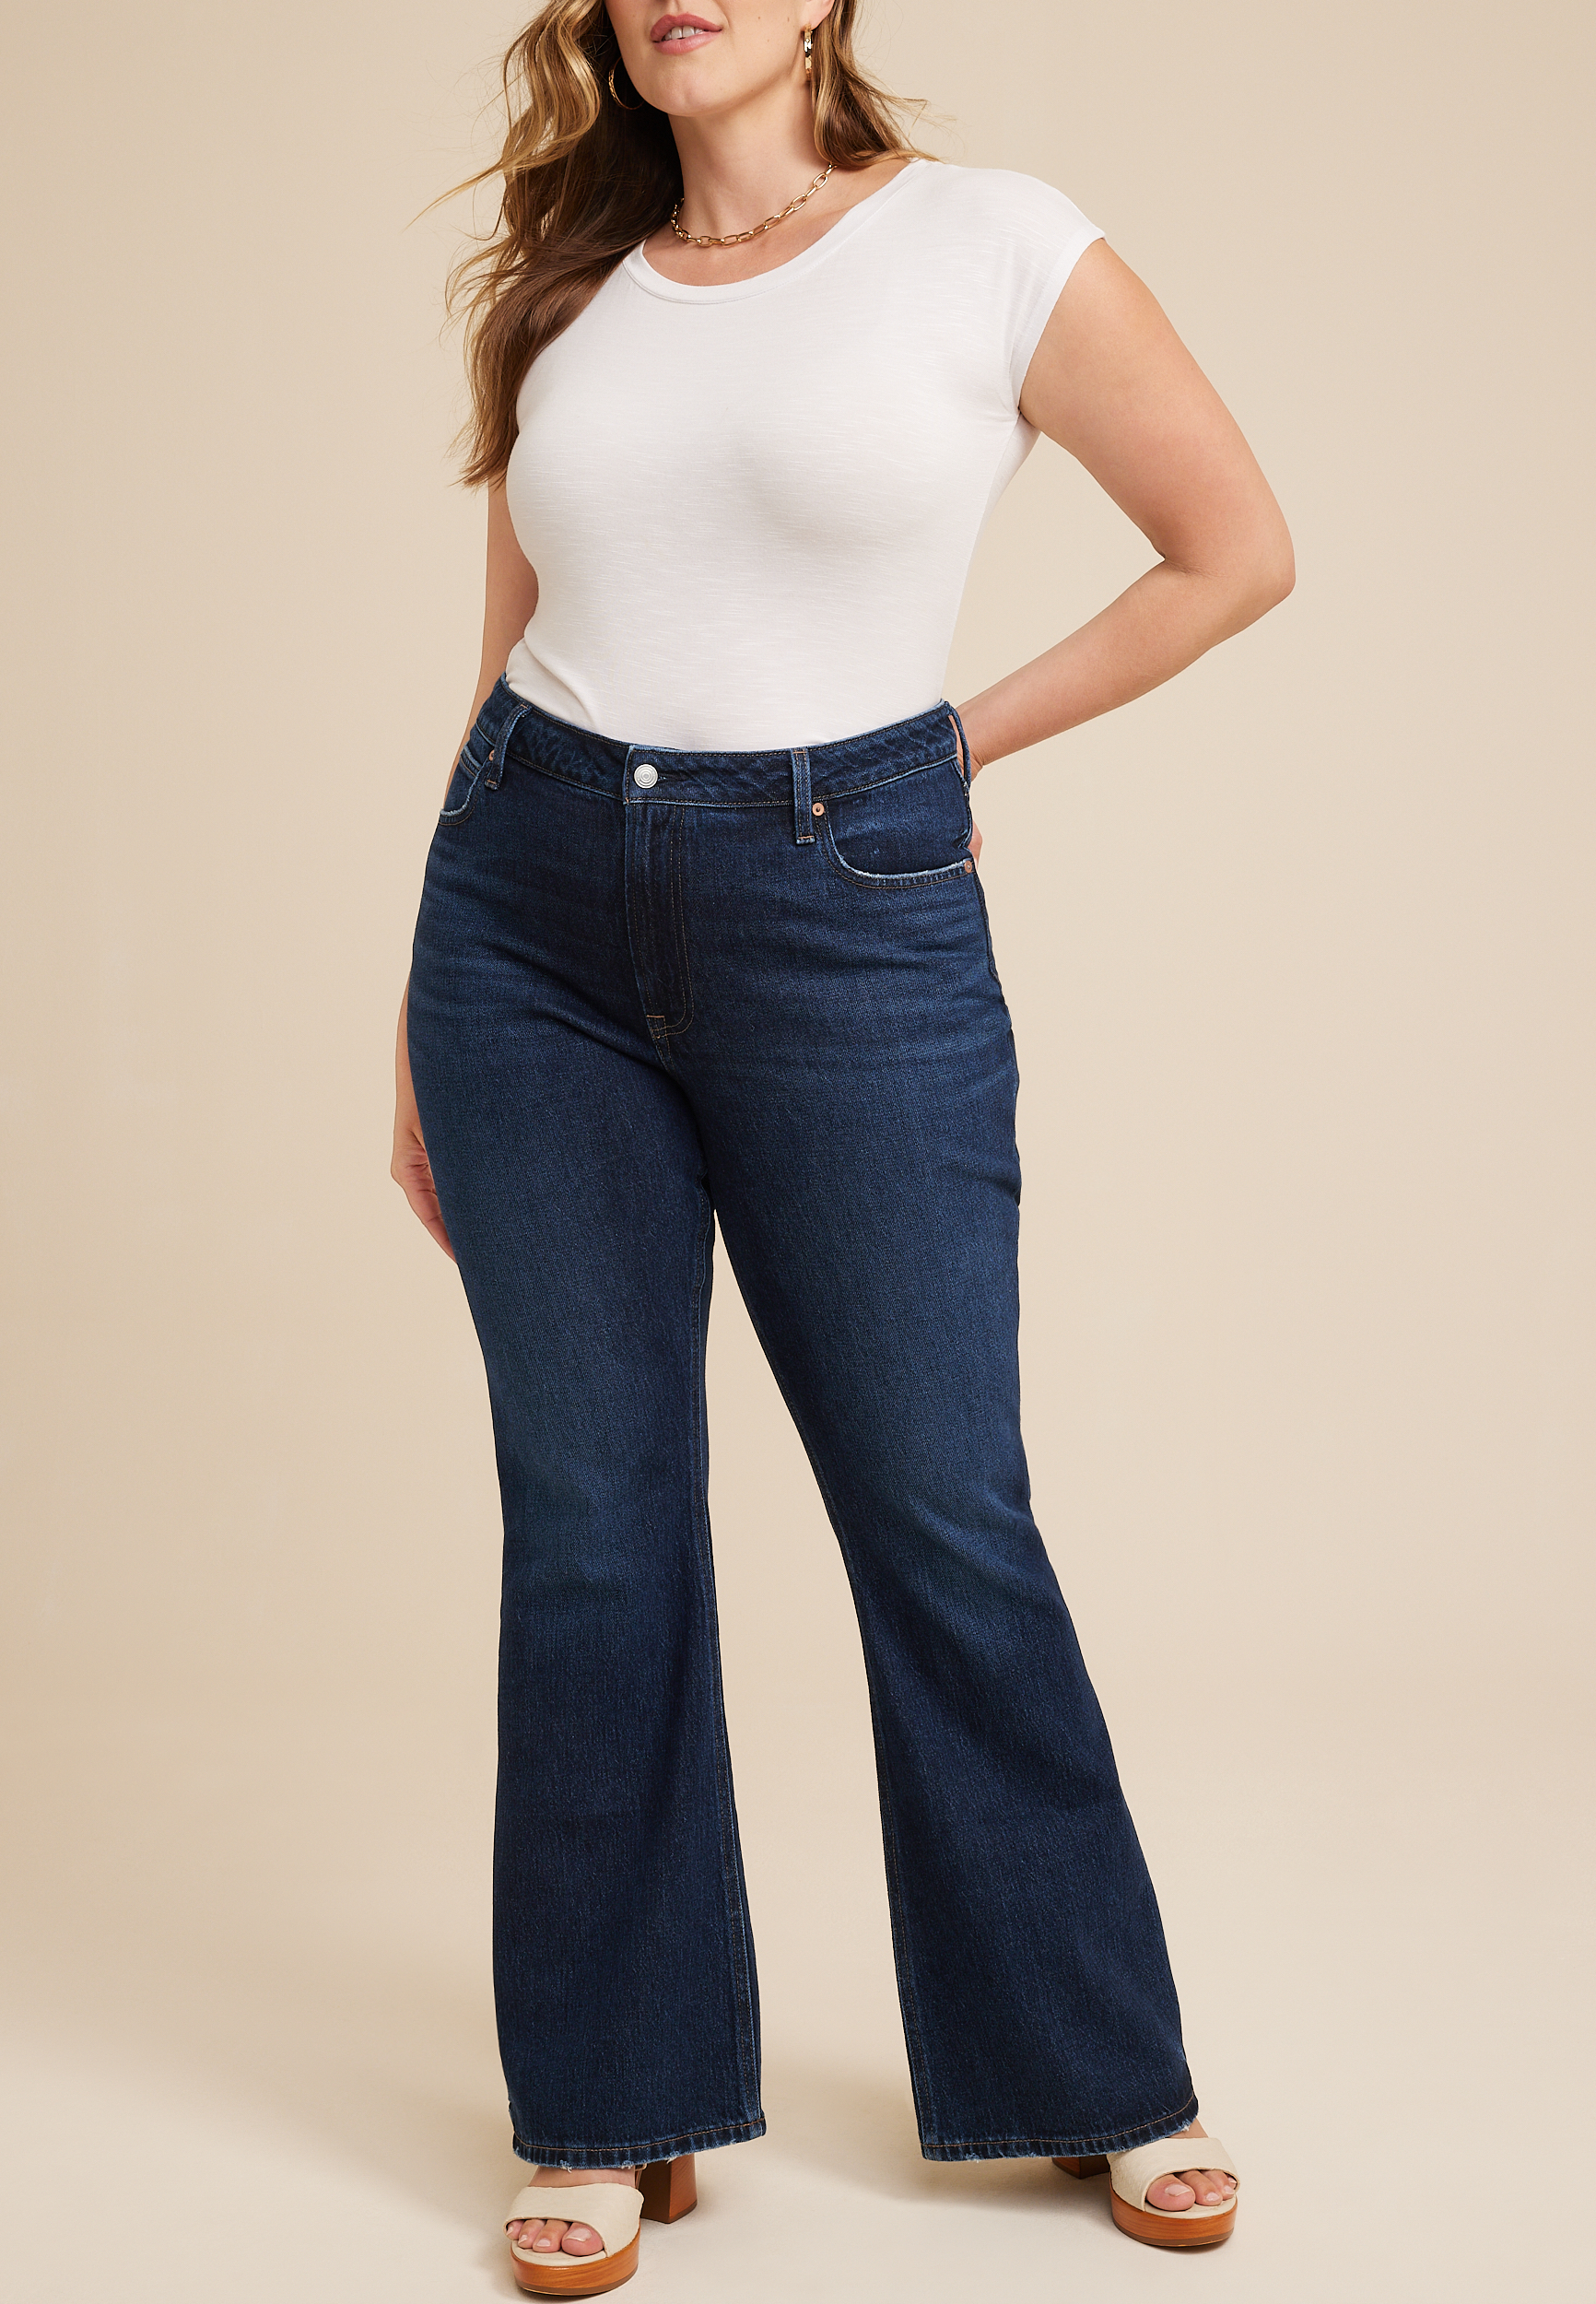 Plus Size Goldie Blues™ High Rise Curvy Dark 90s Flare Jean | maurices